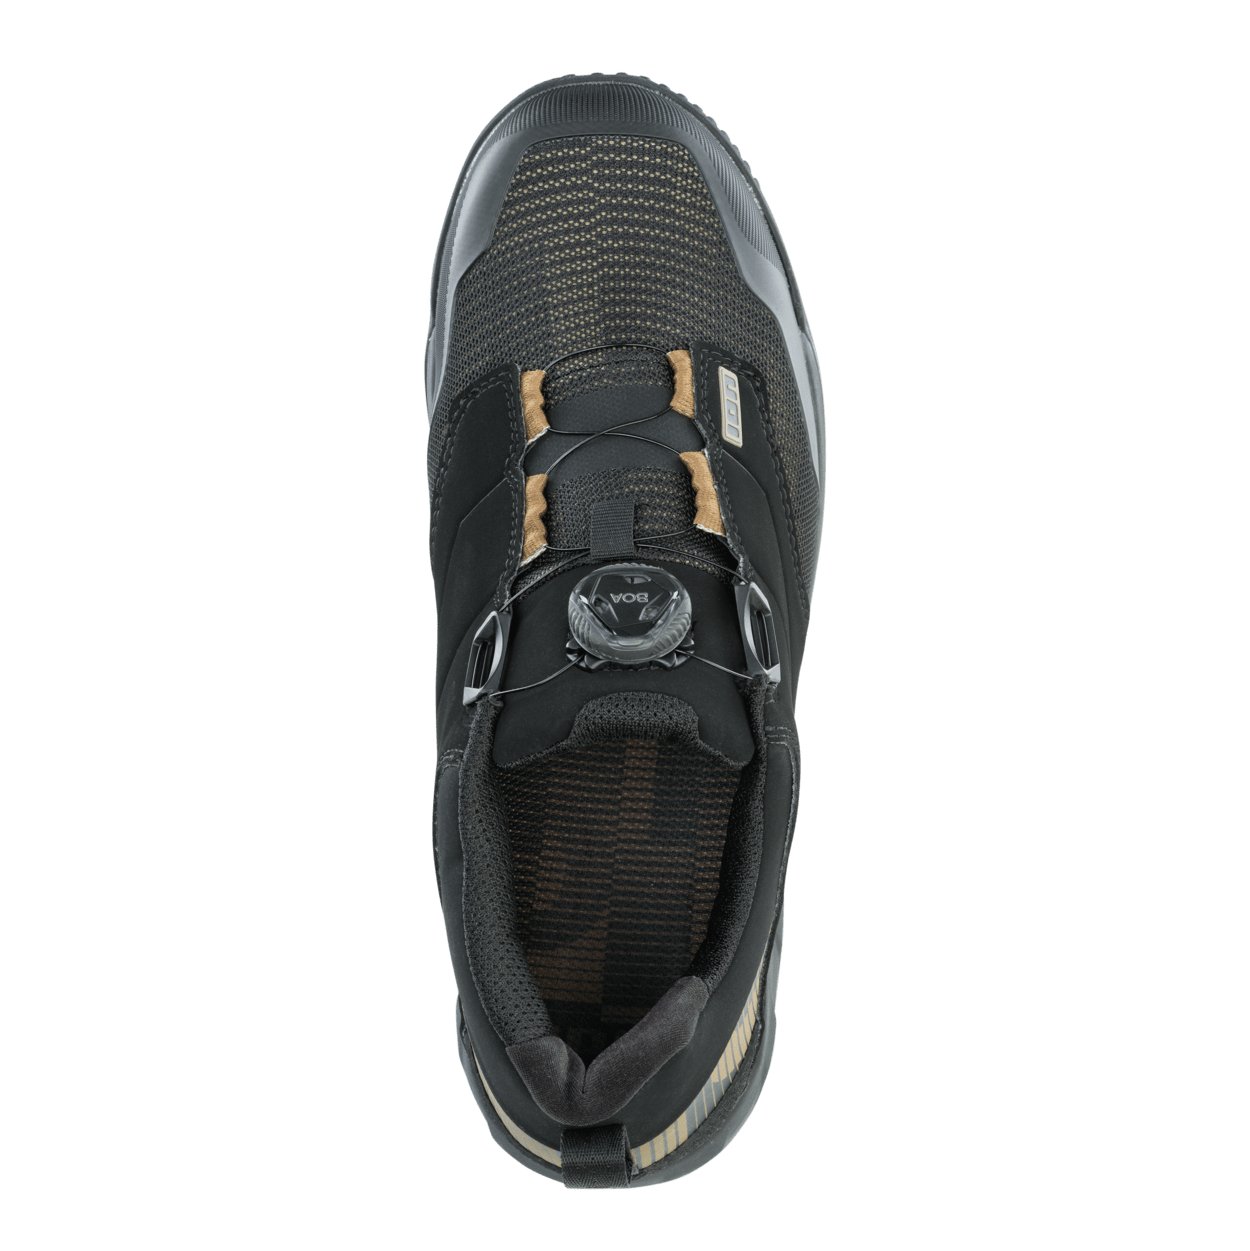 ION MTB Clipless Shoes Rascal Select BOA 2023 - Worthing Watersports - 9008415981779 - Footwear - ION Bike